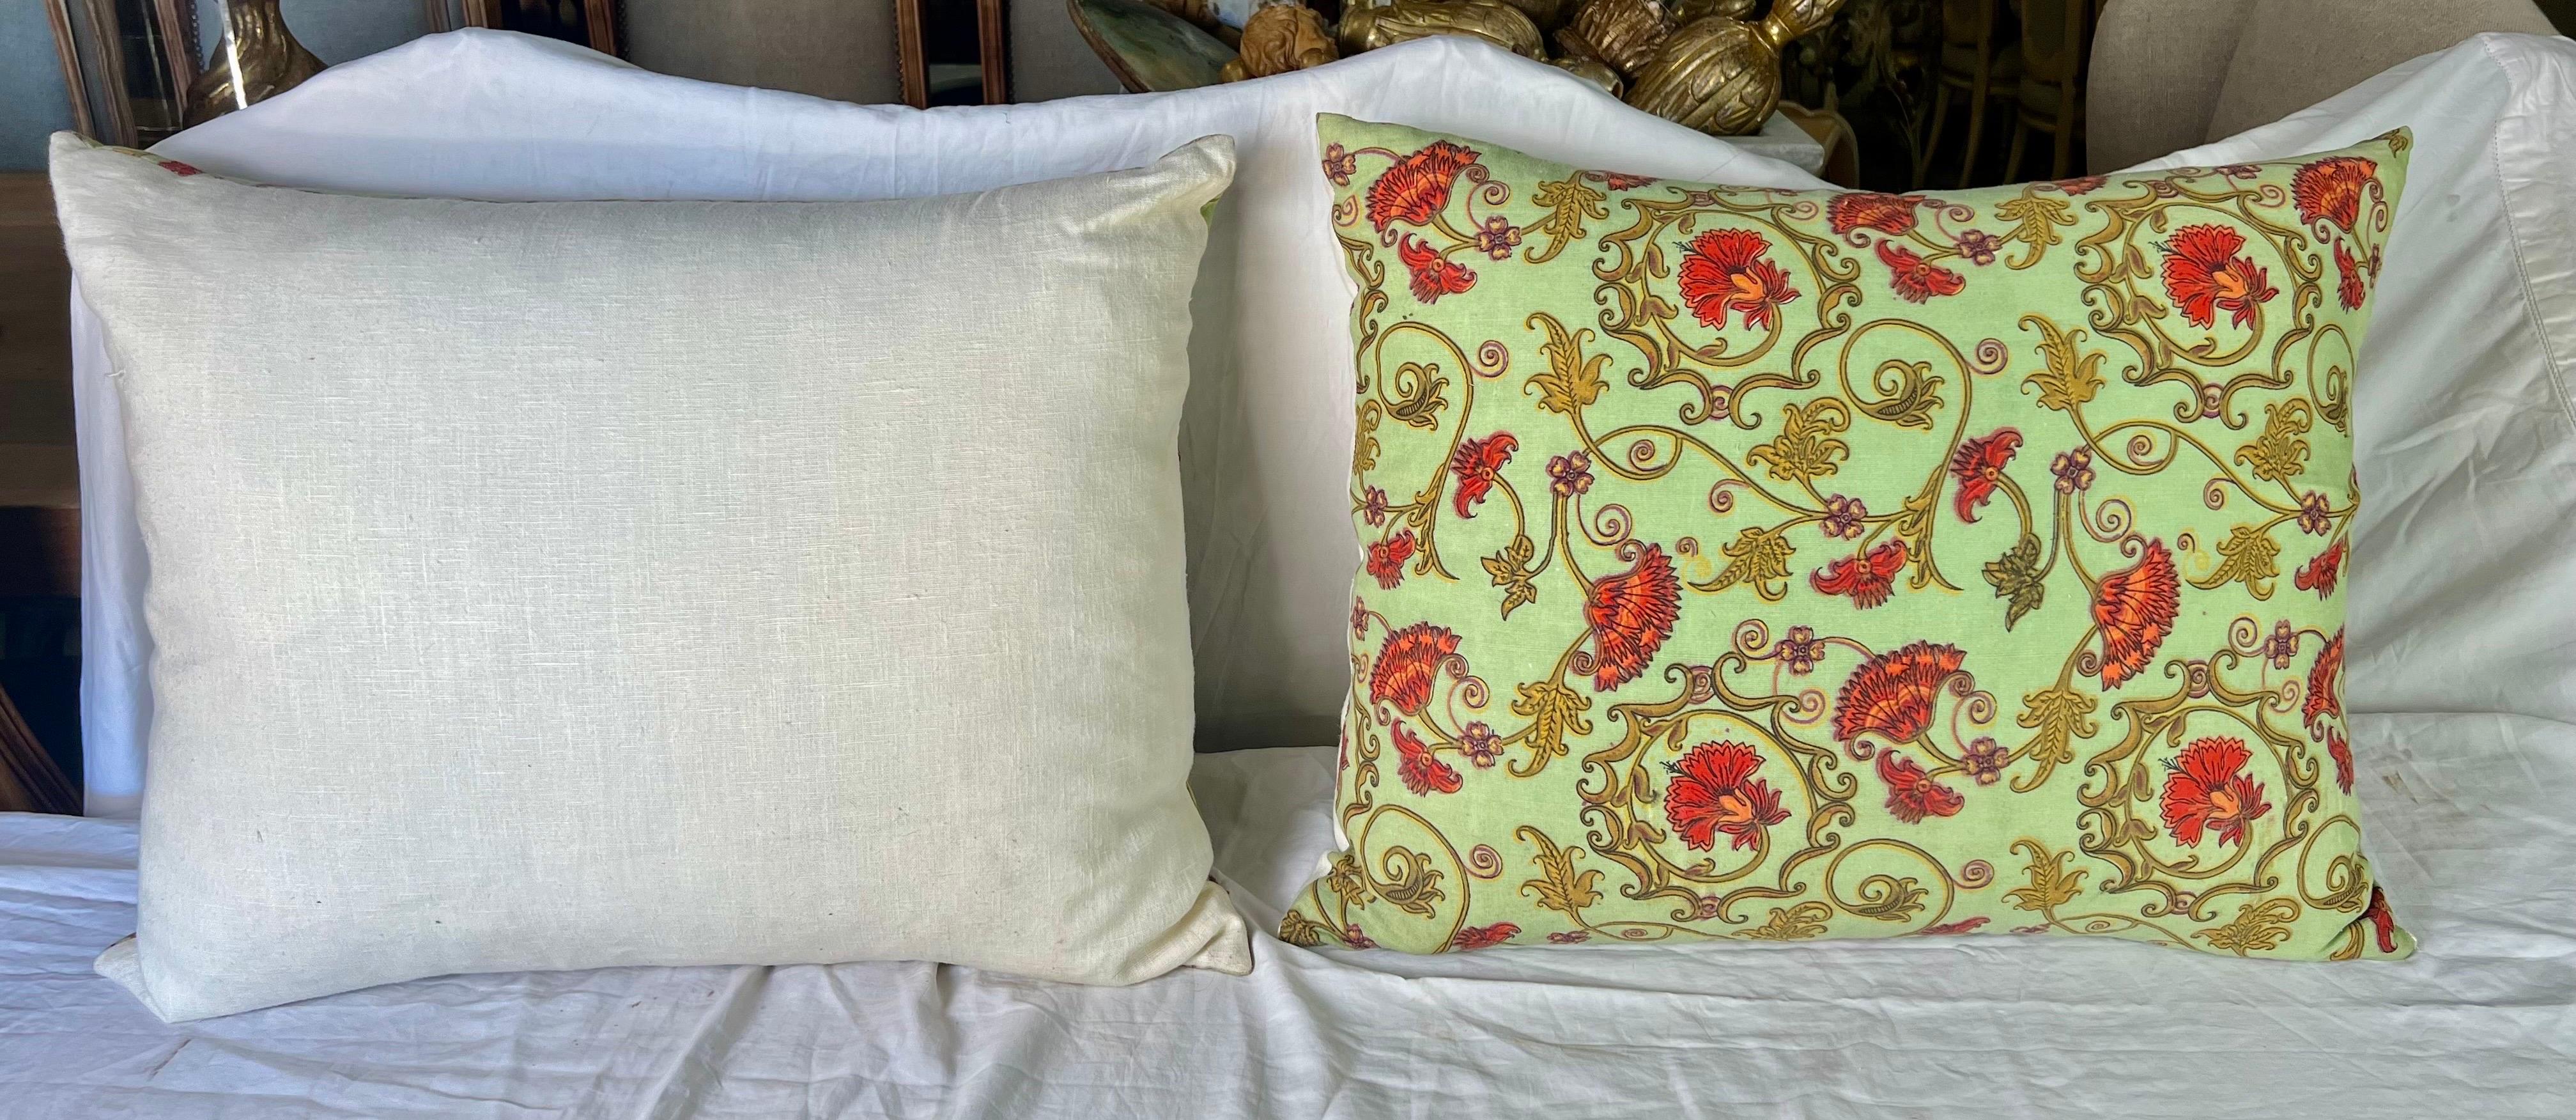 Pair of Custom Cotton Floral Pillows In Good Condition For Sale In Los Angeles, CA